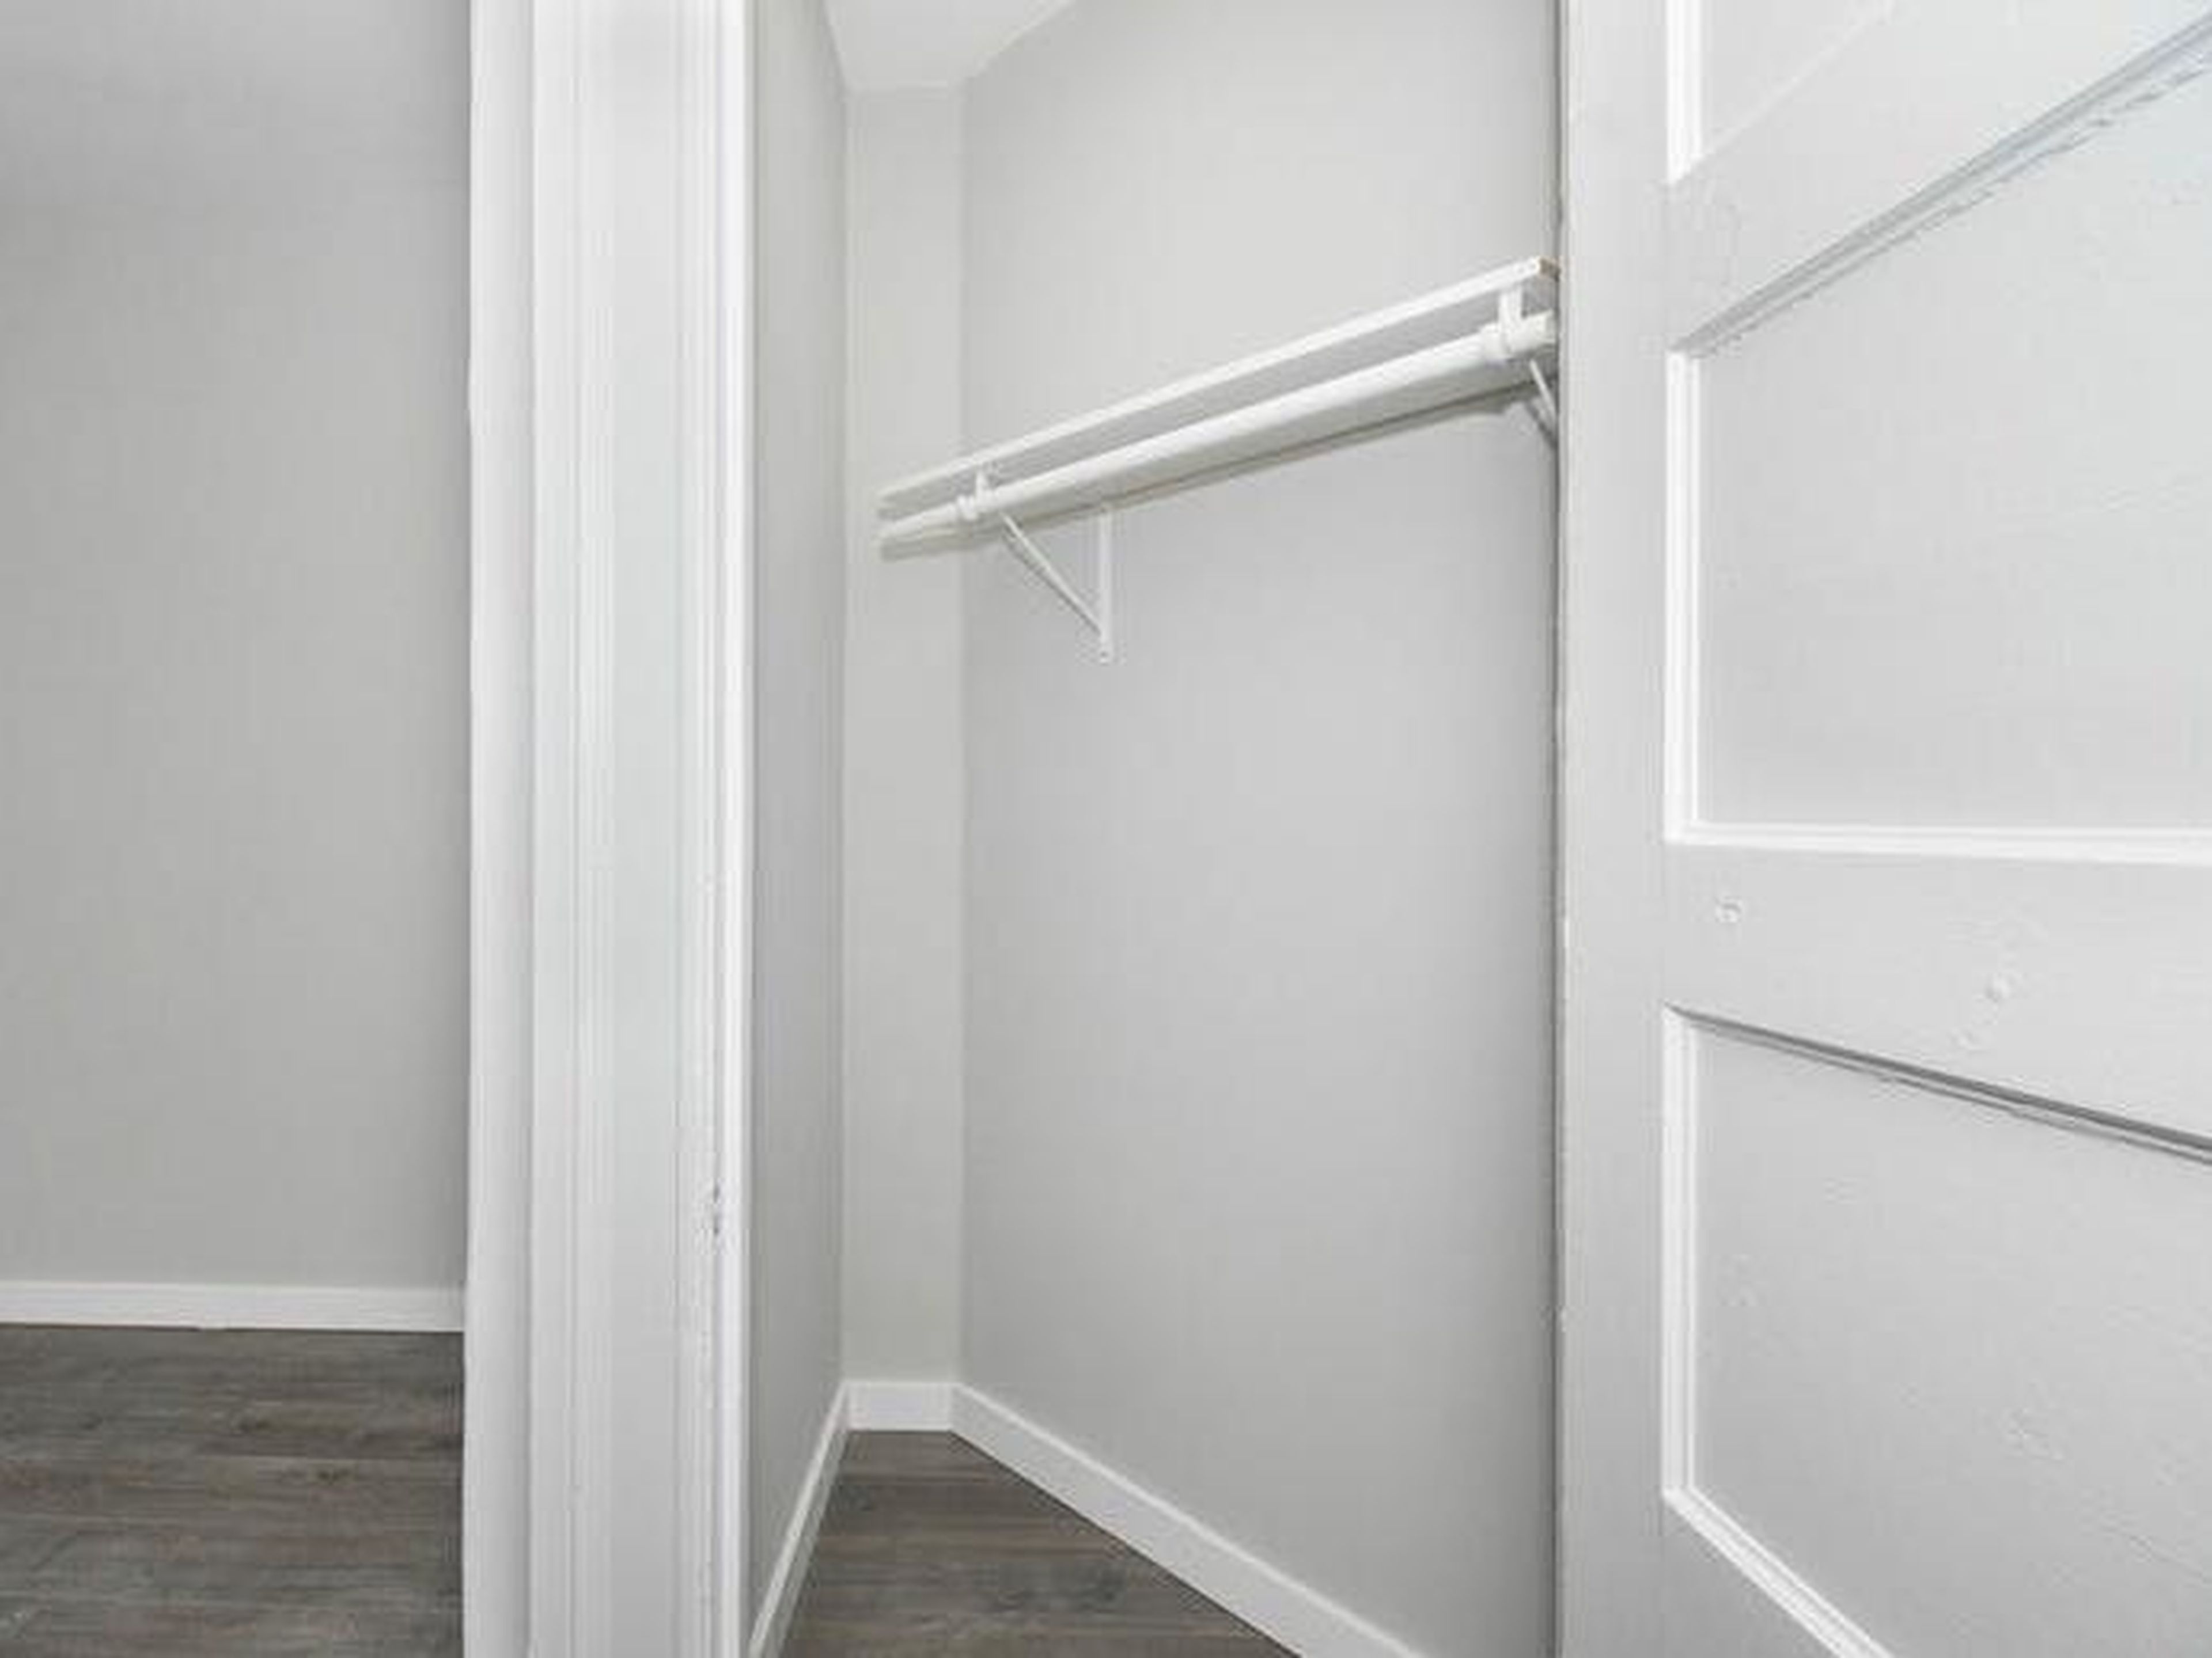 The studio did manage to squeeze in some space for a triangular closet, which is also next to the front door.